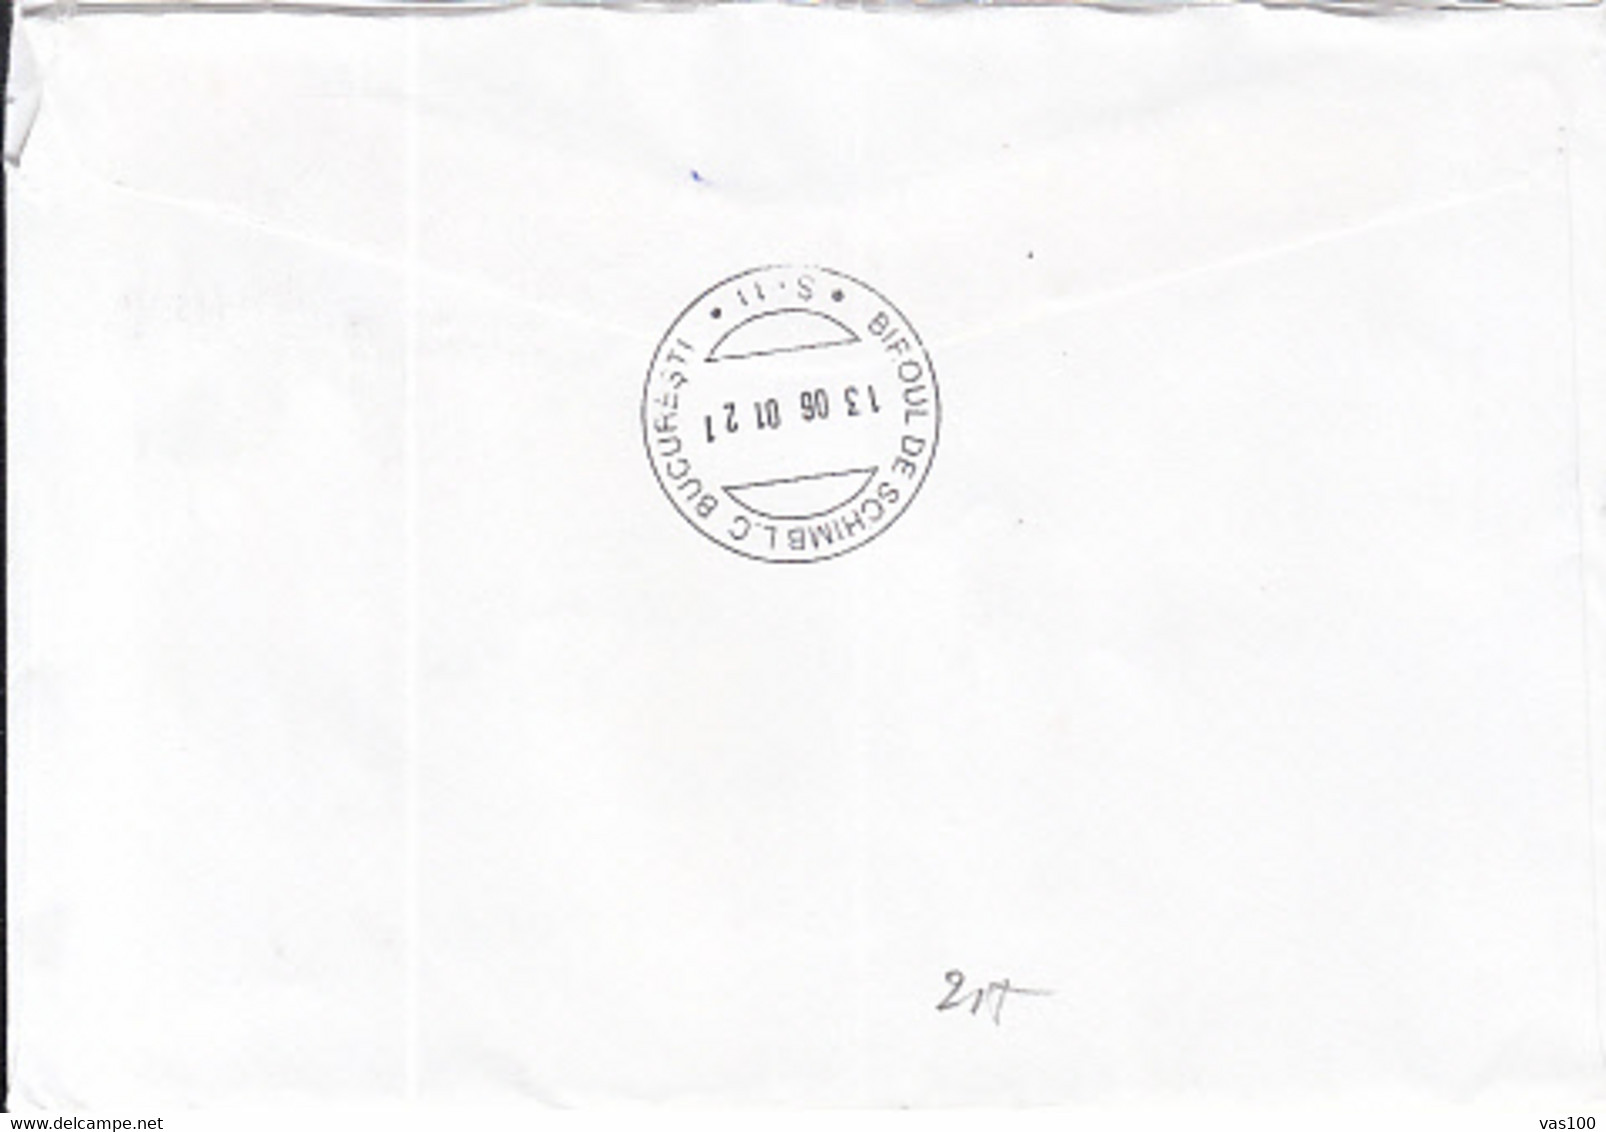 STAMP'S DAY, BRATISLAVA CASTLE, STAMPS ON REGISTERED COVER, 2001, SLOVAKIA - Lettres & Documents